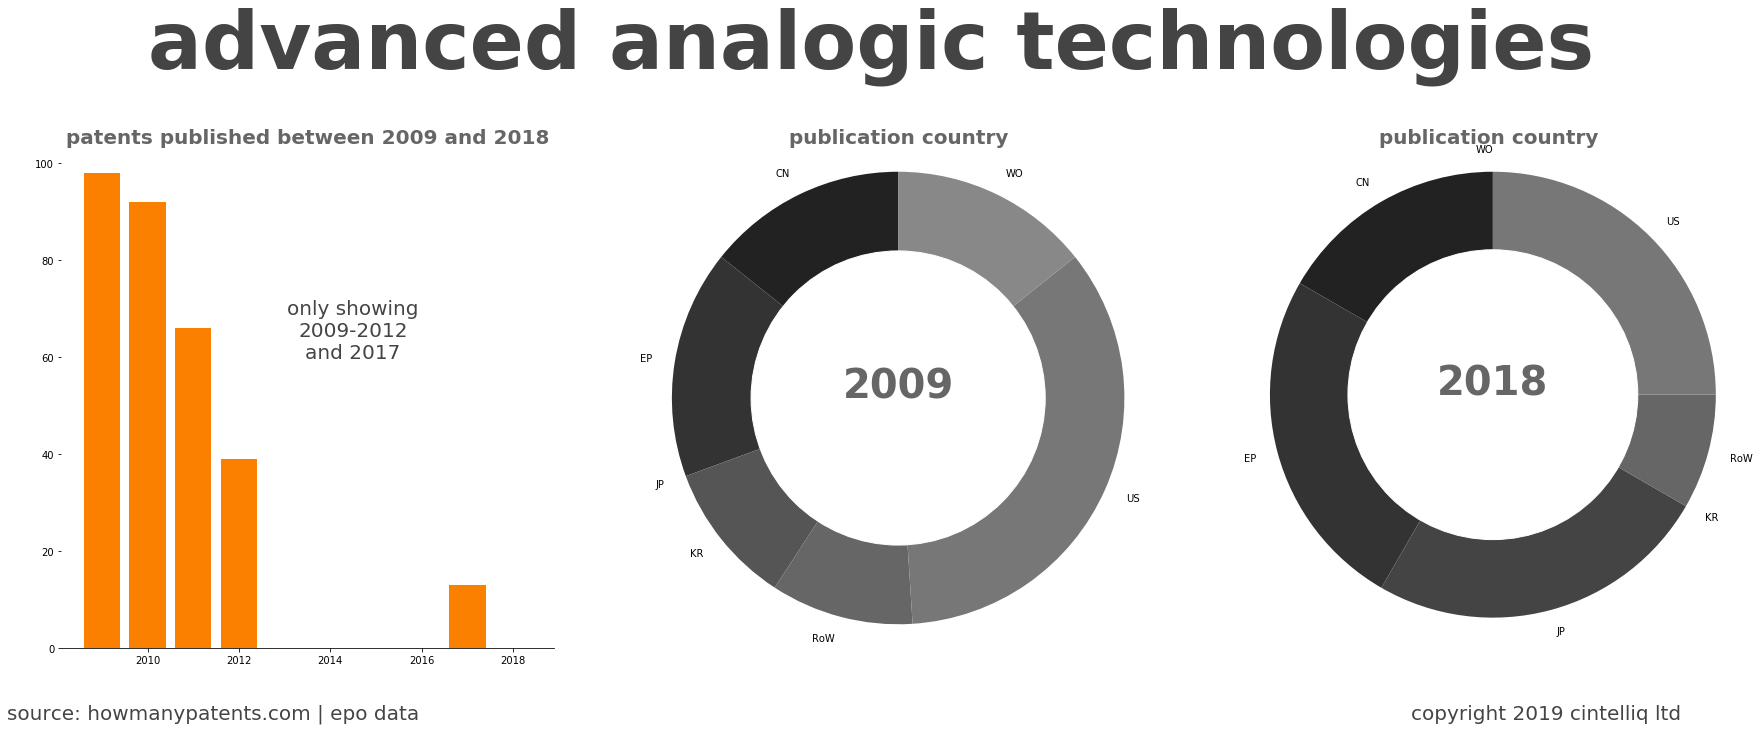 summary of patents for Advanced Analogic Technologies